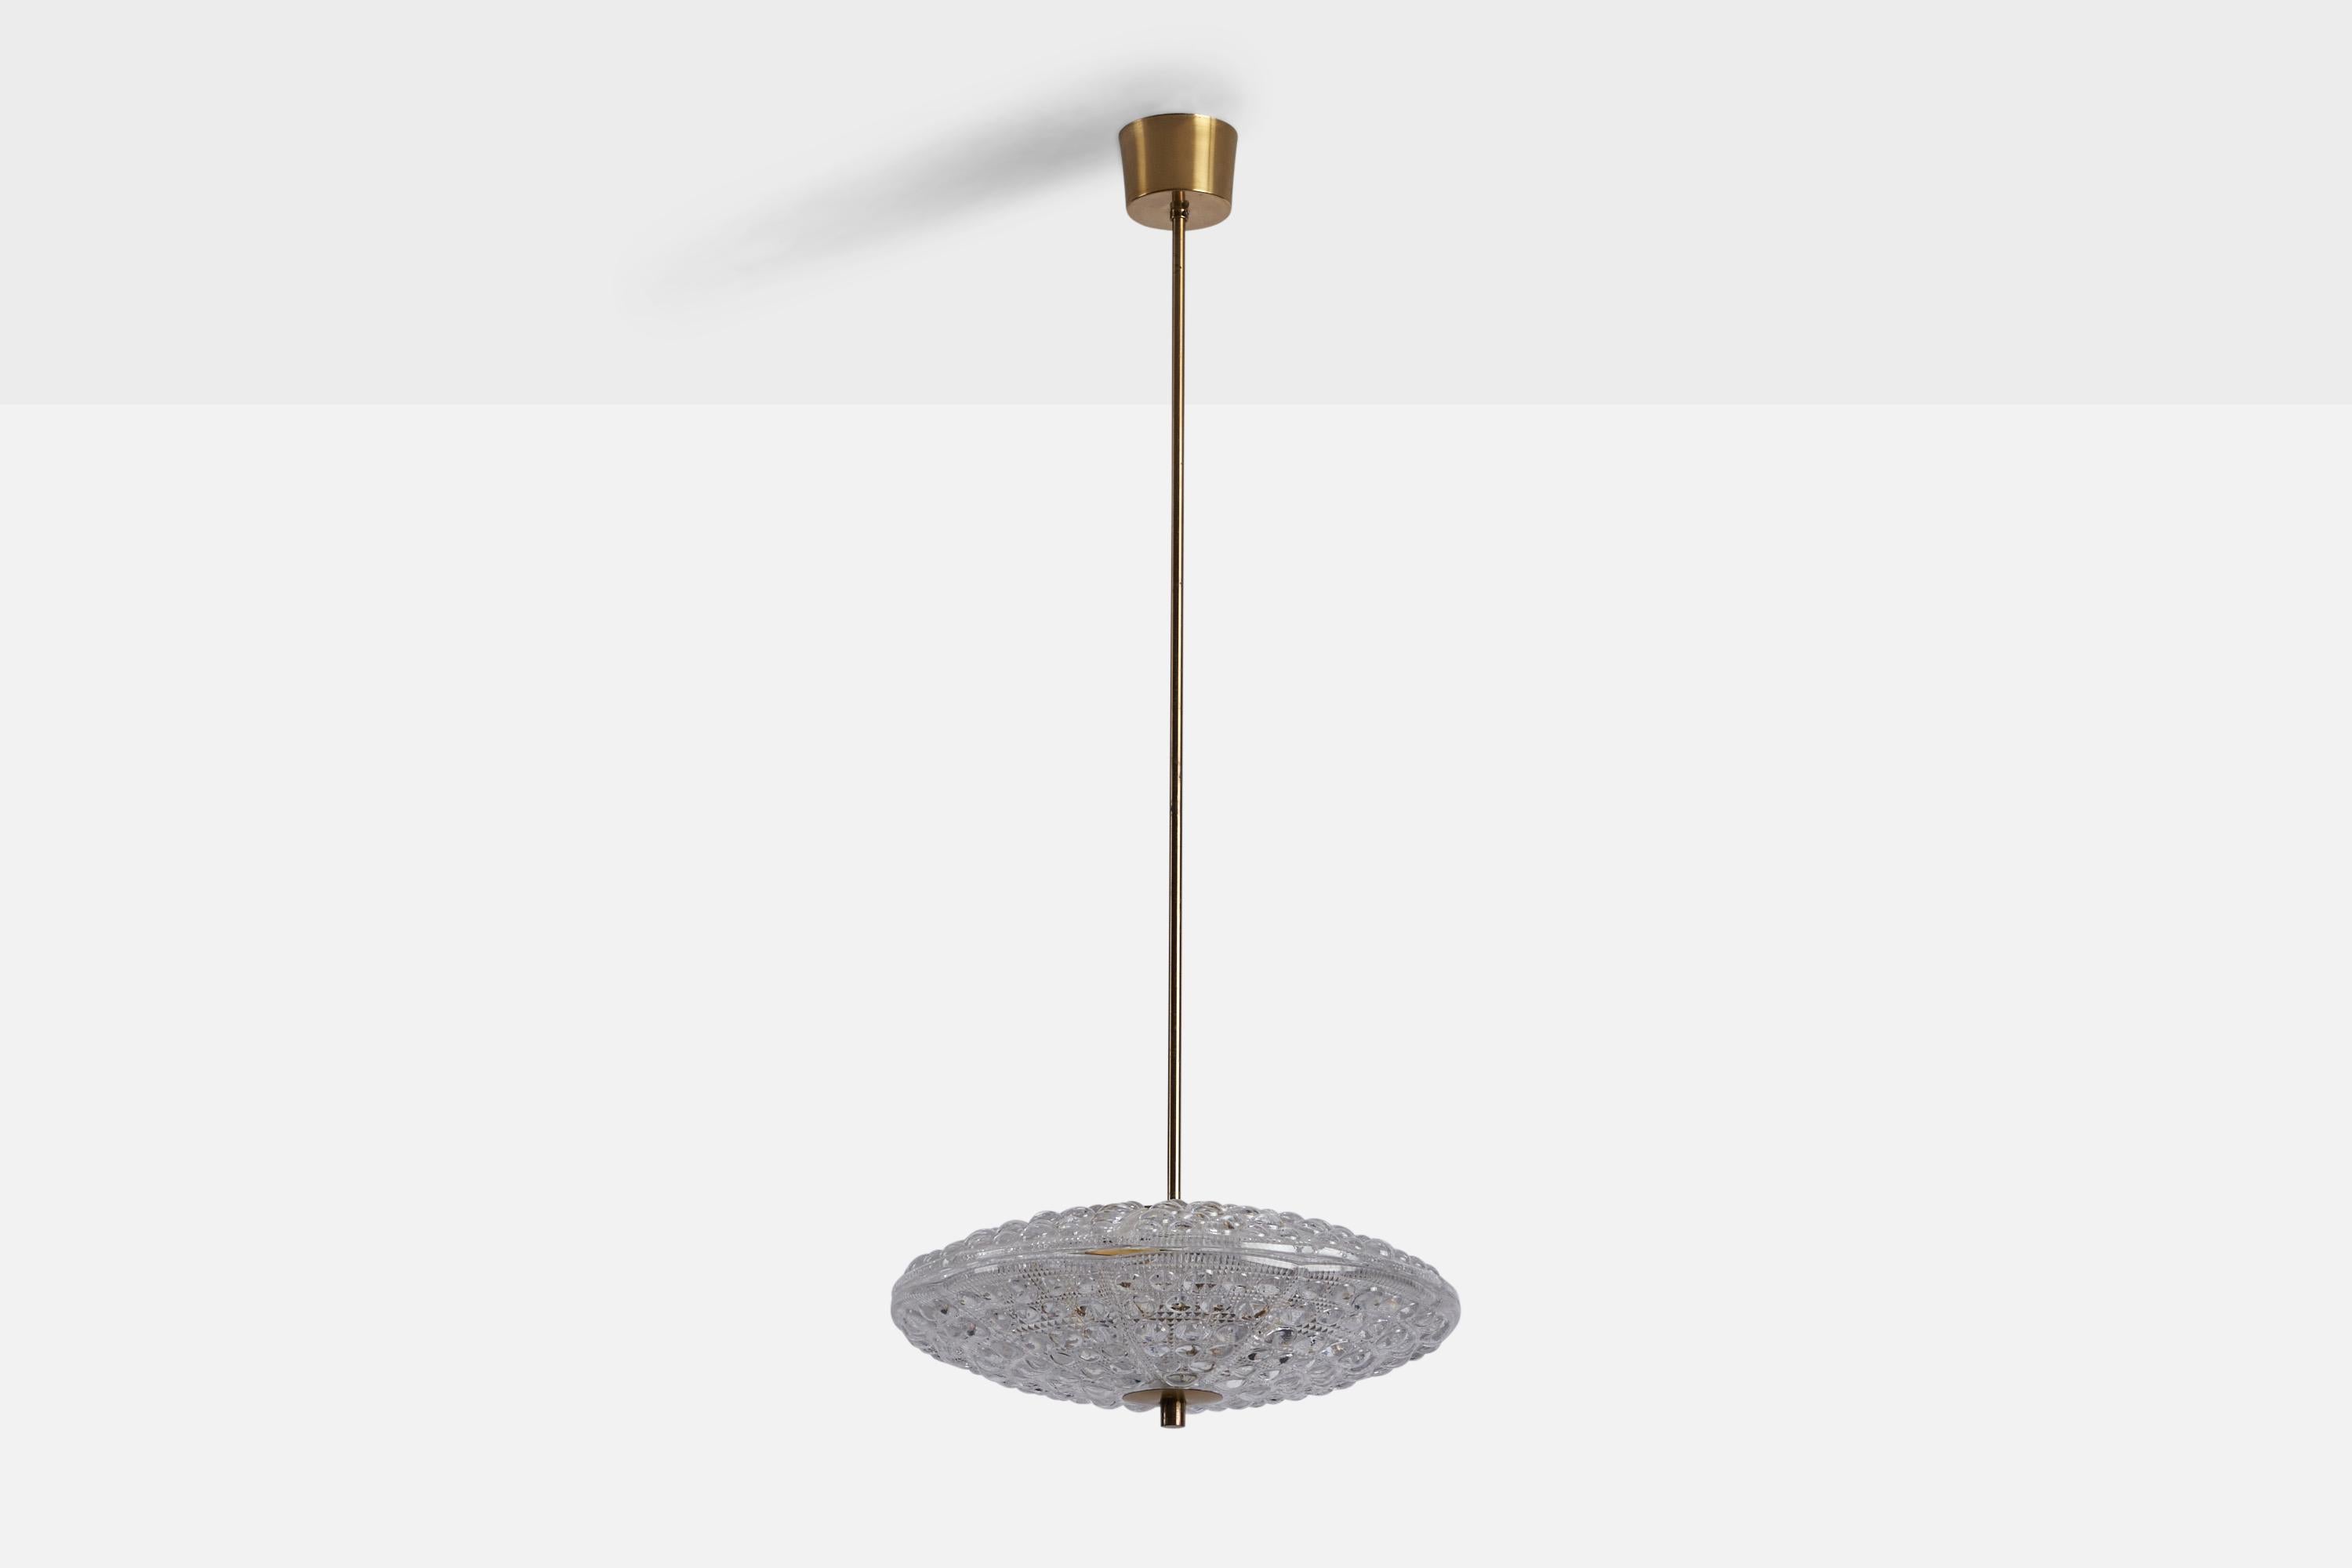 A brass and glass pendant light designed by Carl Fagerlund and produced by Orrefors, Sweden, 1950s.

Overall Dimensions (inches): 37.5” H x 16” Diameter
Bulb Specifications: E-14 Bulb
Number of Sockets: 6